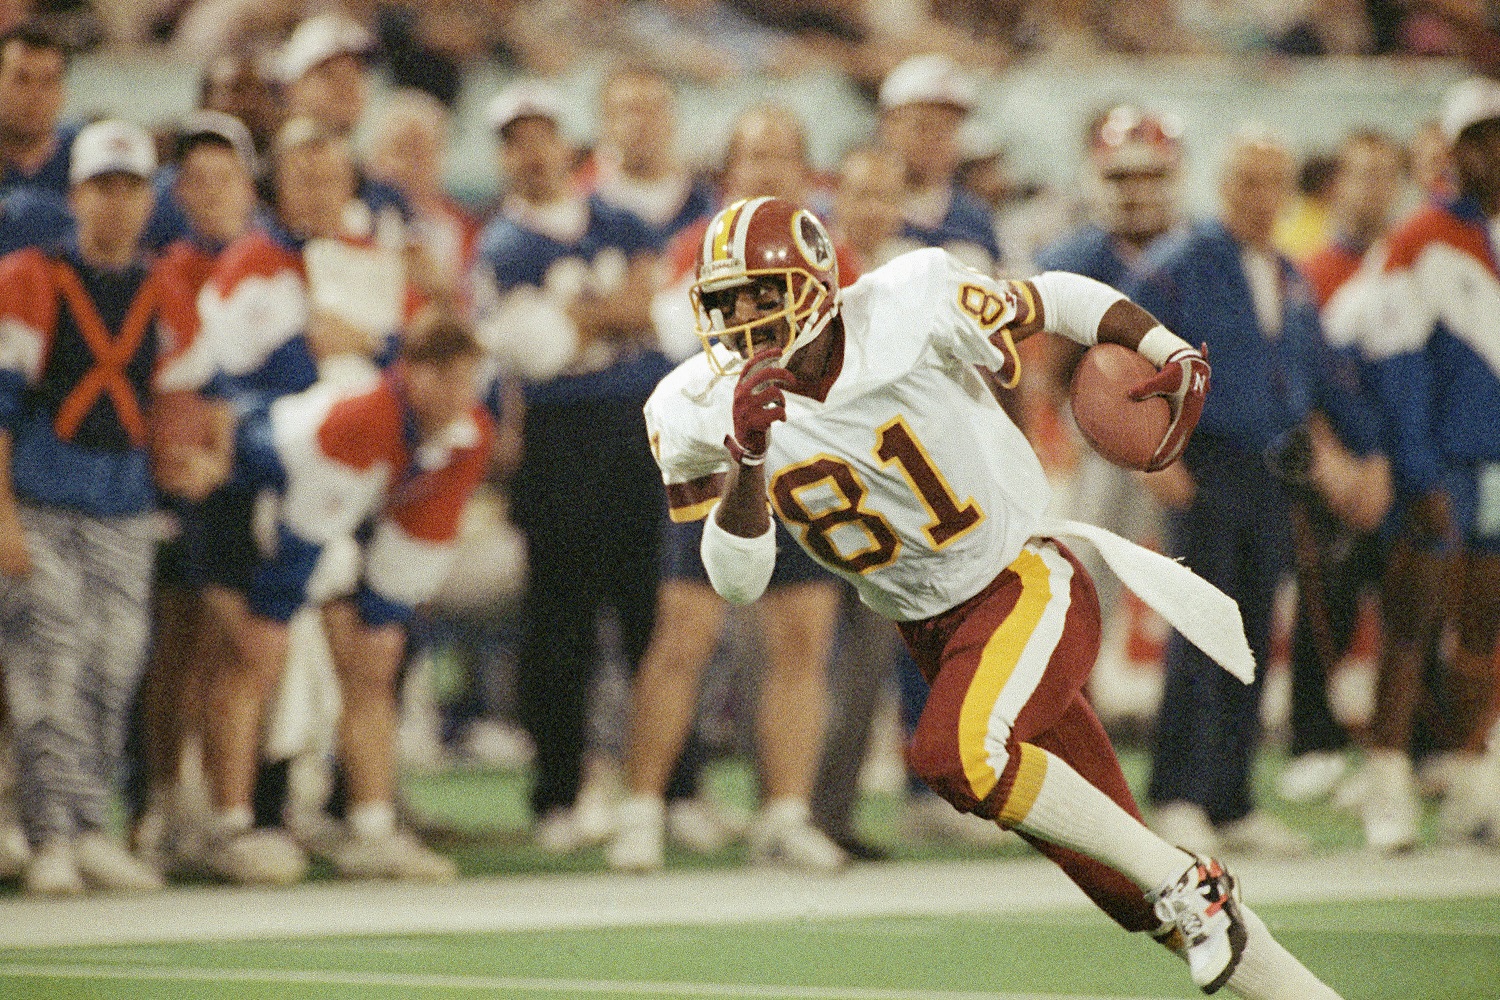 Washington Redskin wide reciever Art Monk picks up yardage after pulling in a pass during first quarter action in Sunday, Jan. 26, 1992 Super Bowl XXVI in Minneapolis, Minnesota. Monk caught five passes in the Redskins first drive. (AP Photo/David Longstreath)